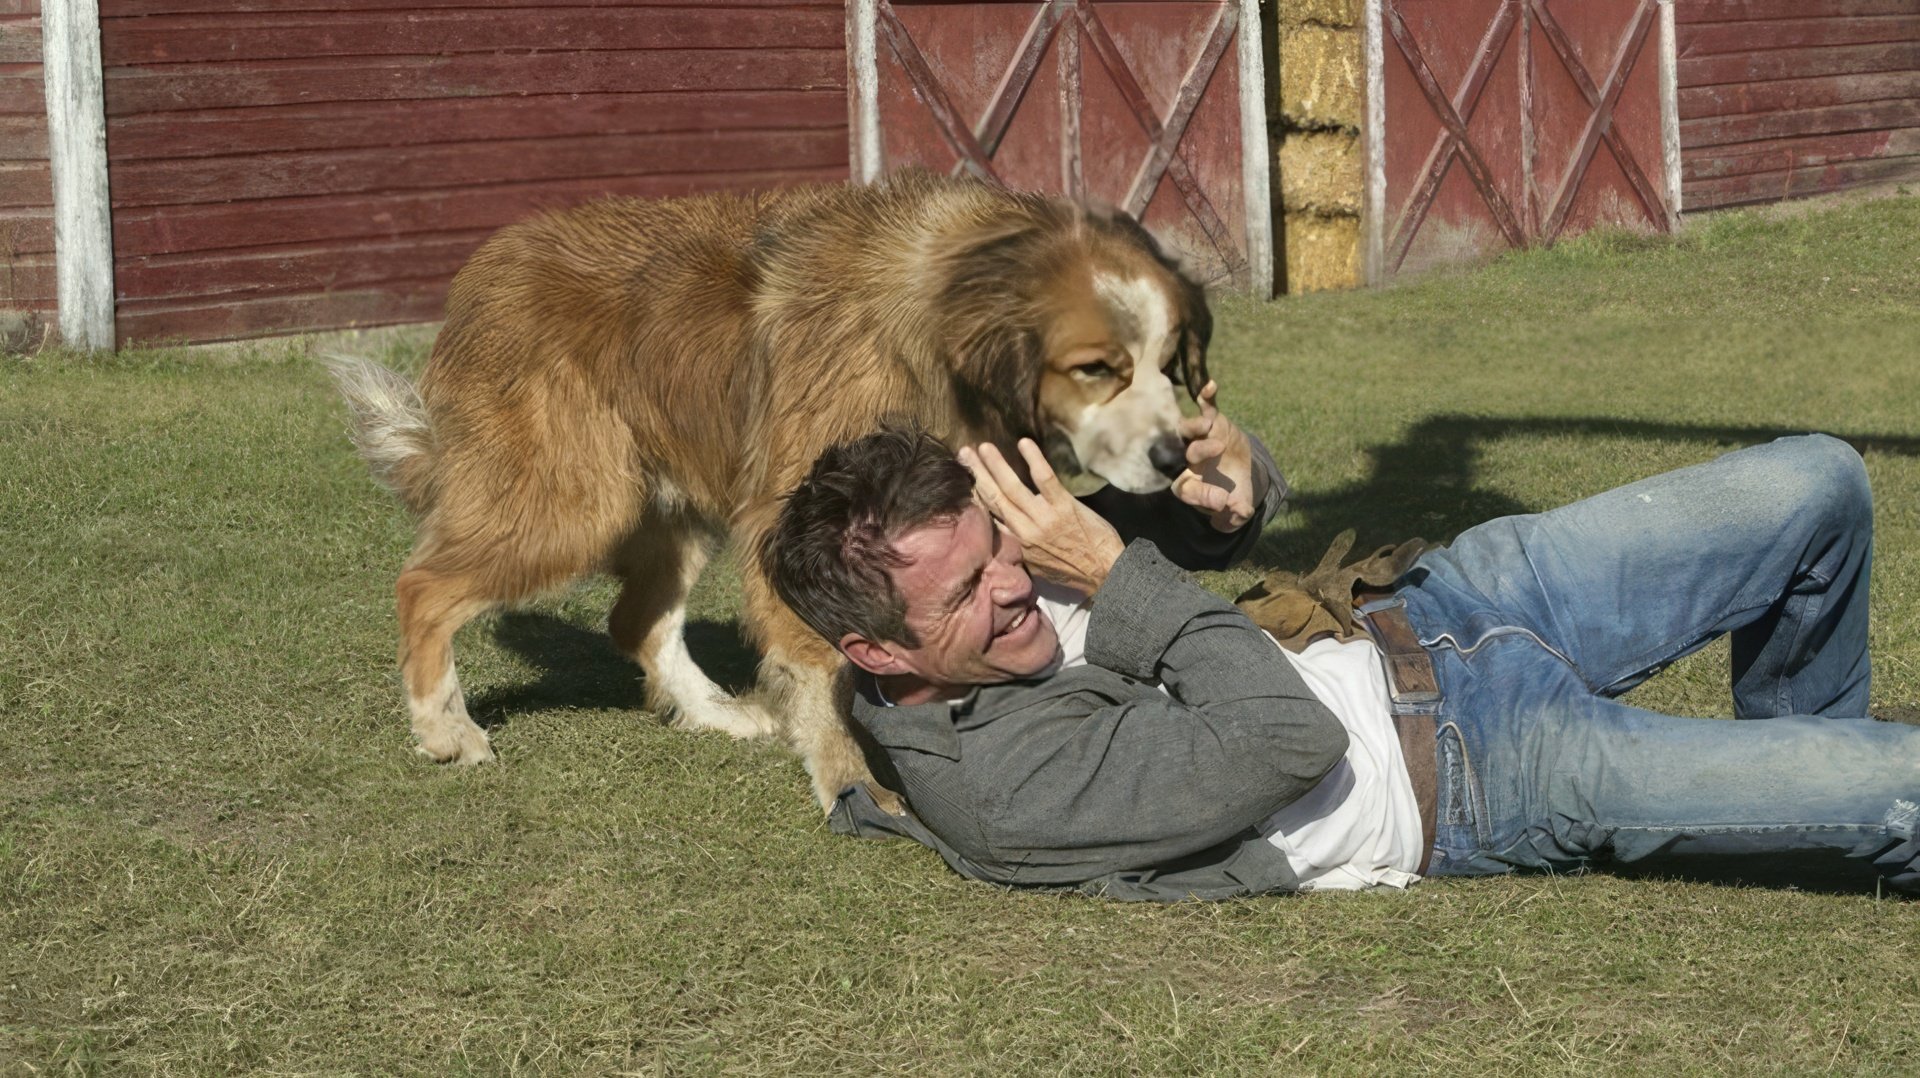 In the movie 'A Dog's Purpose'